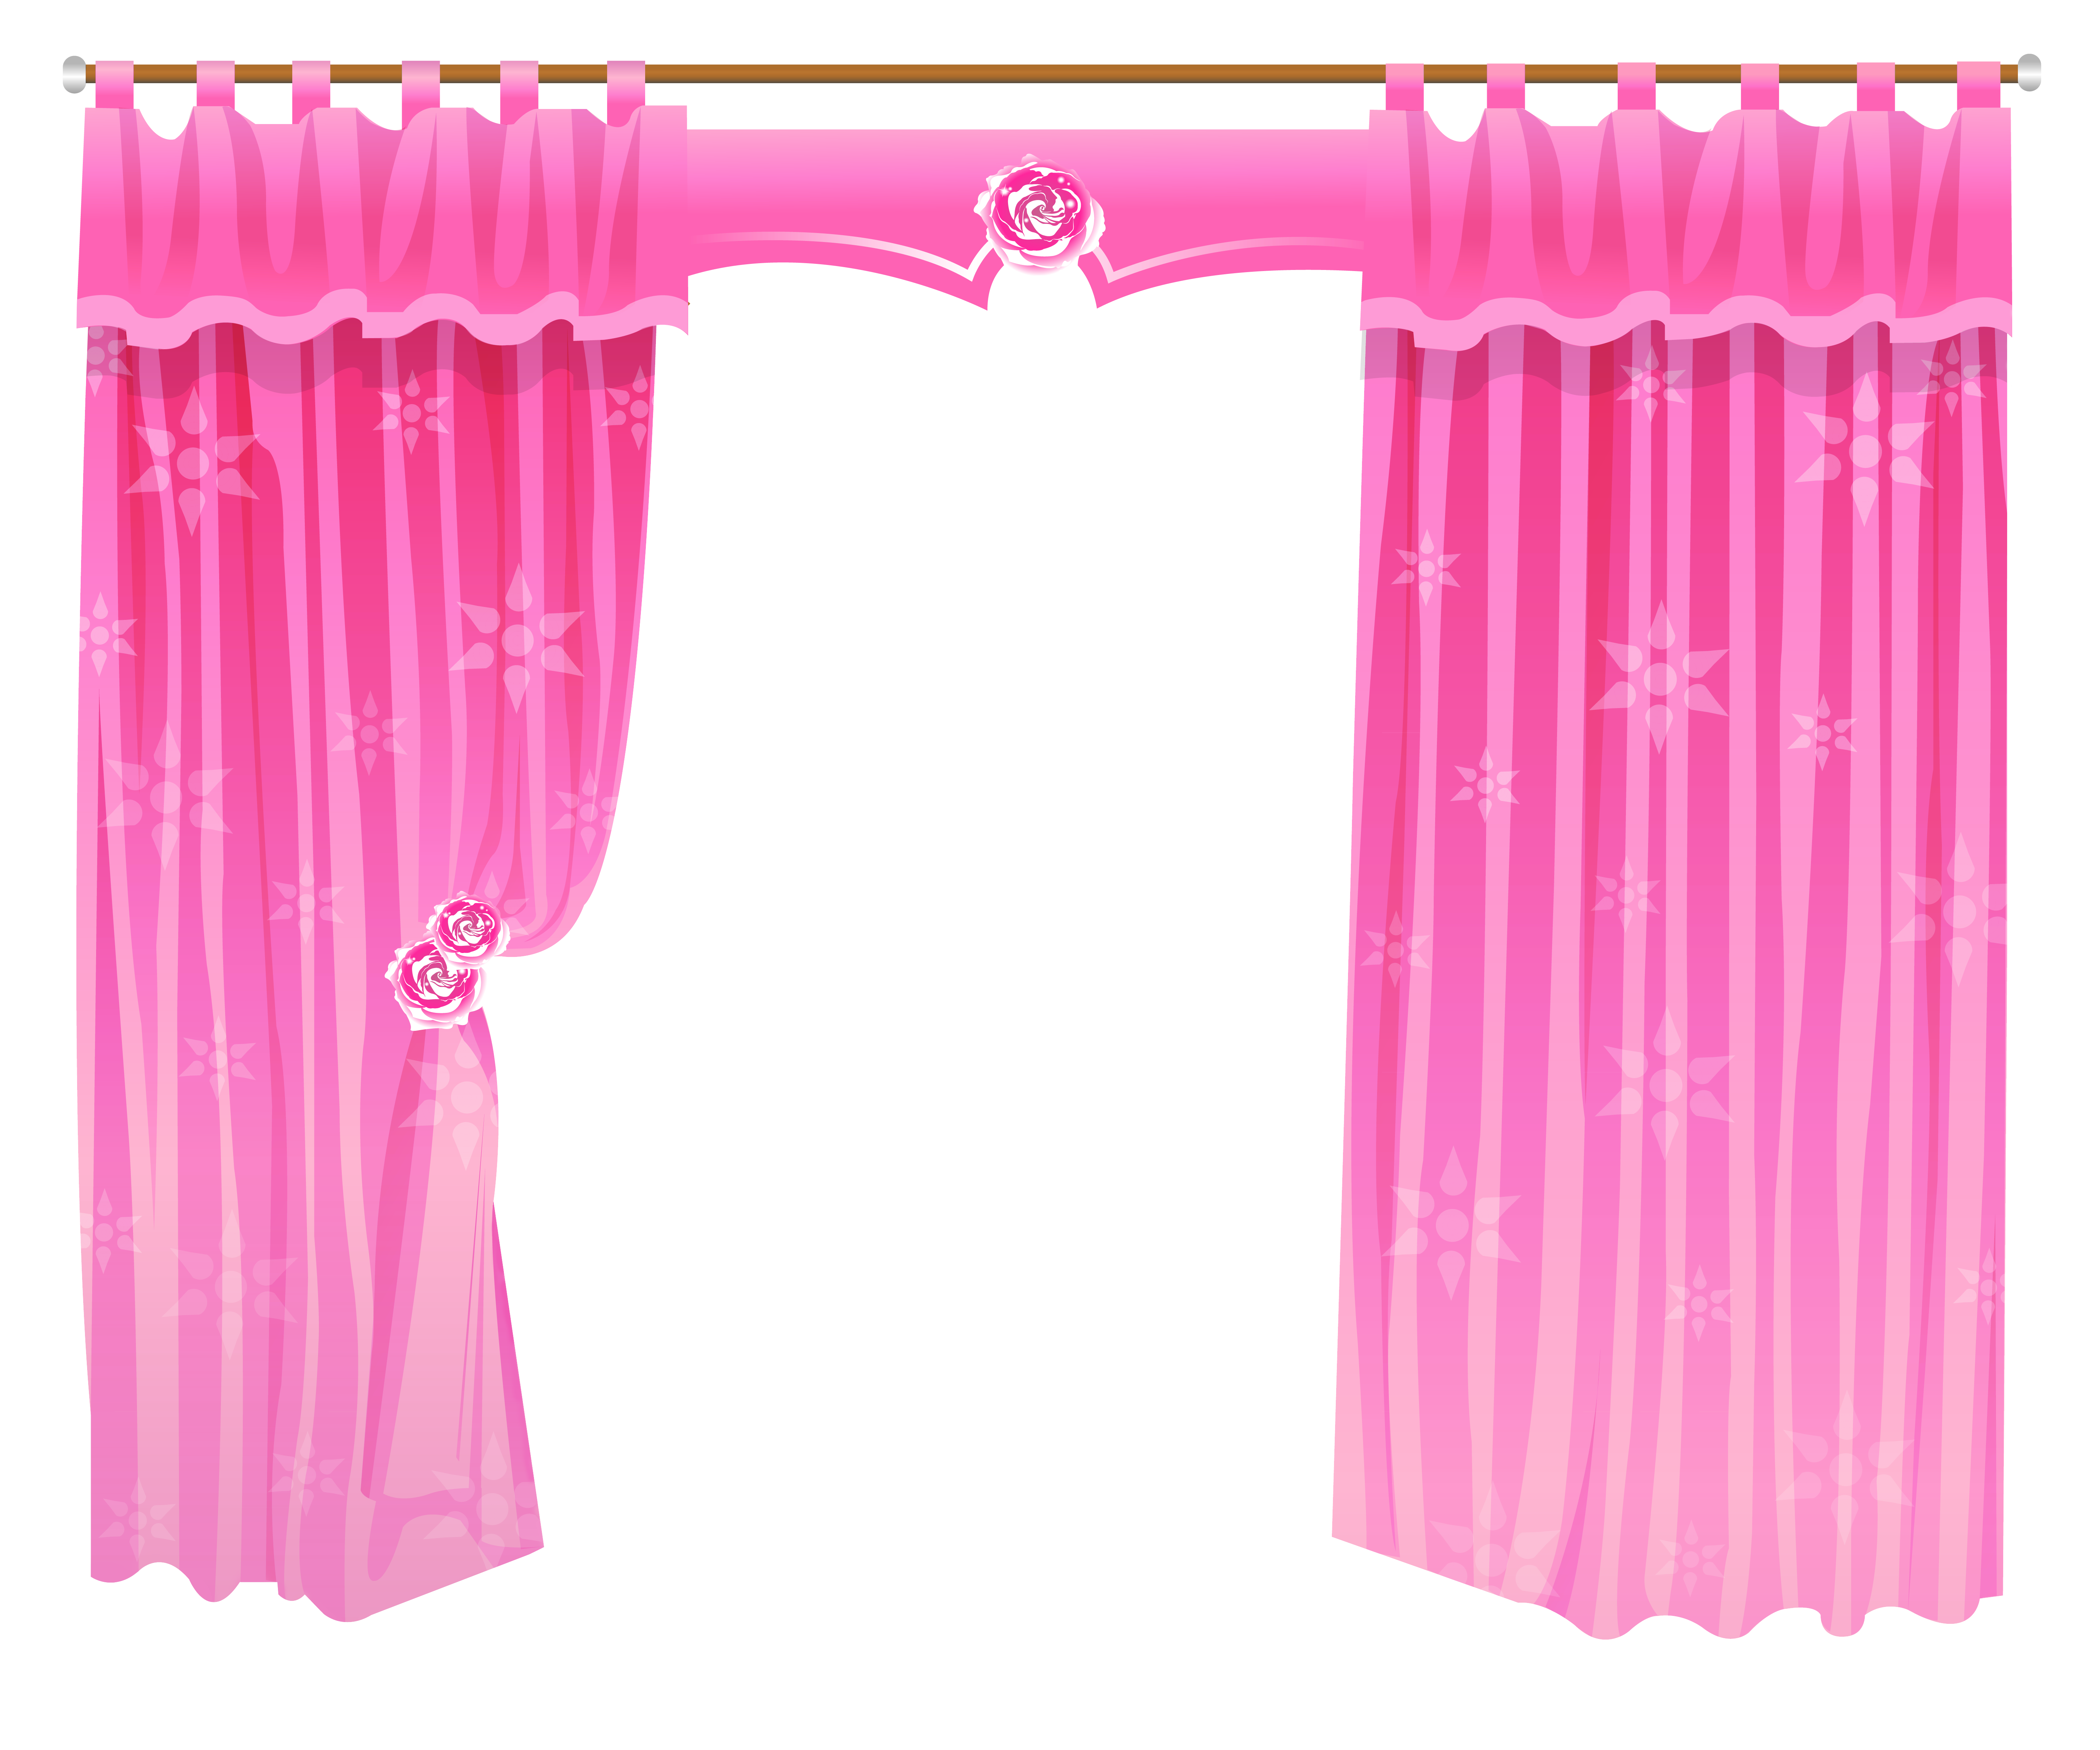 Curtains clipart - Clipground